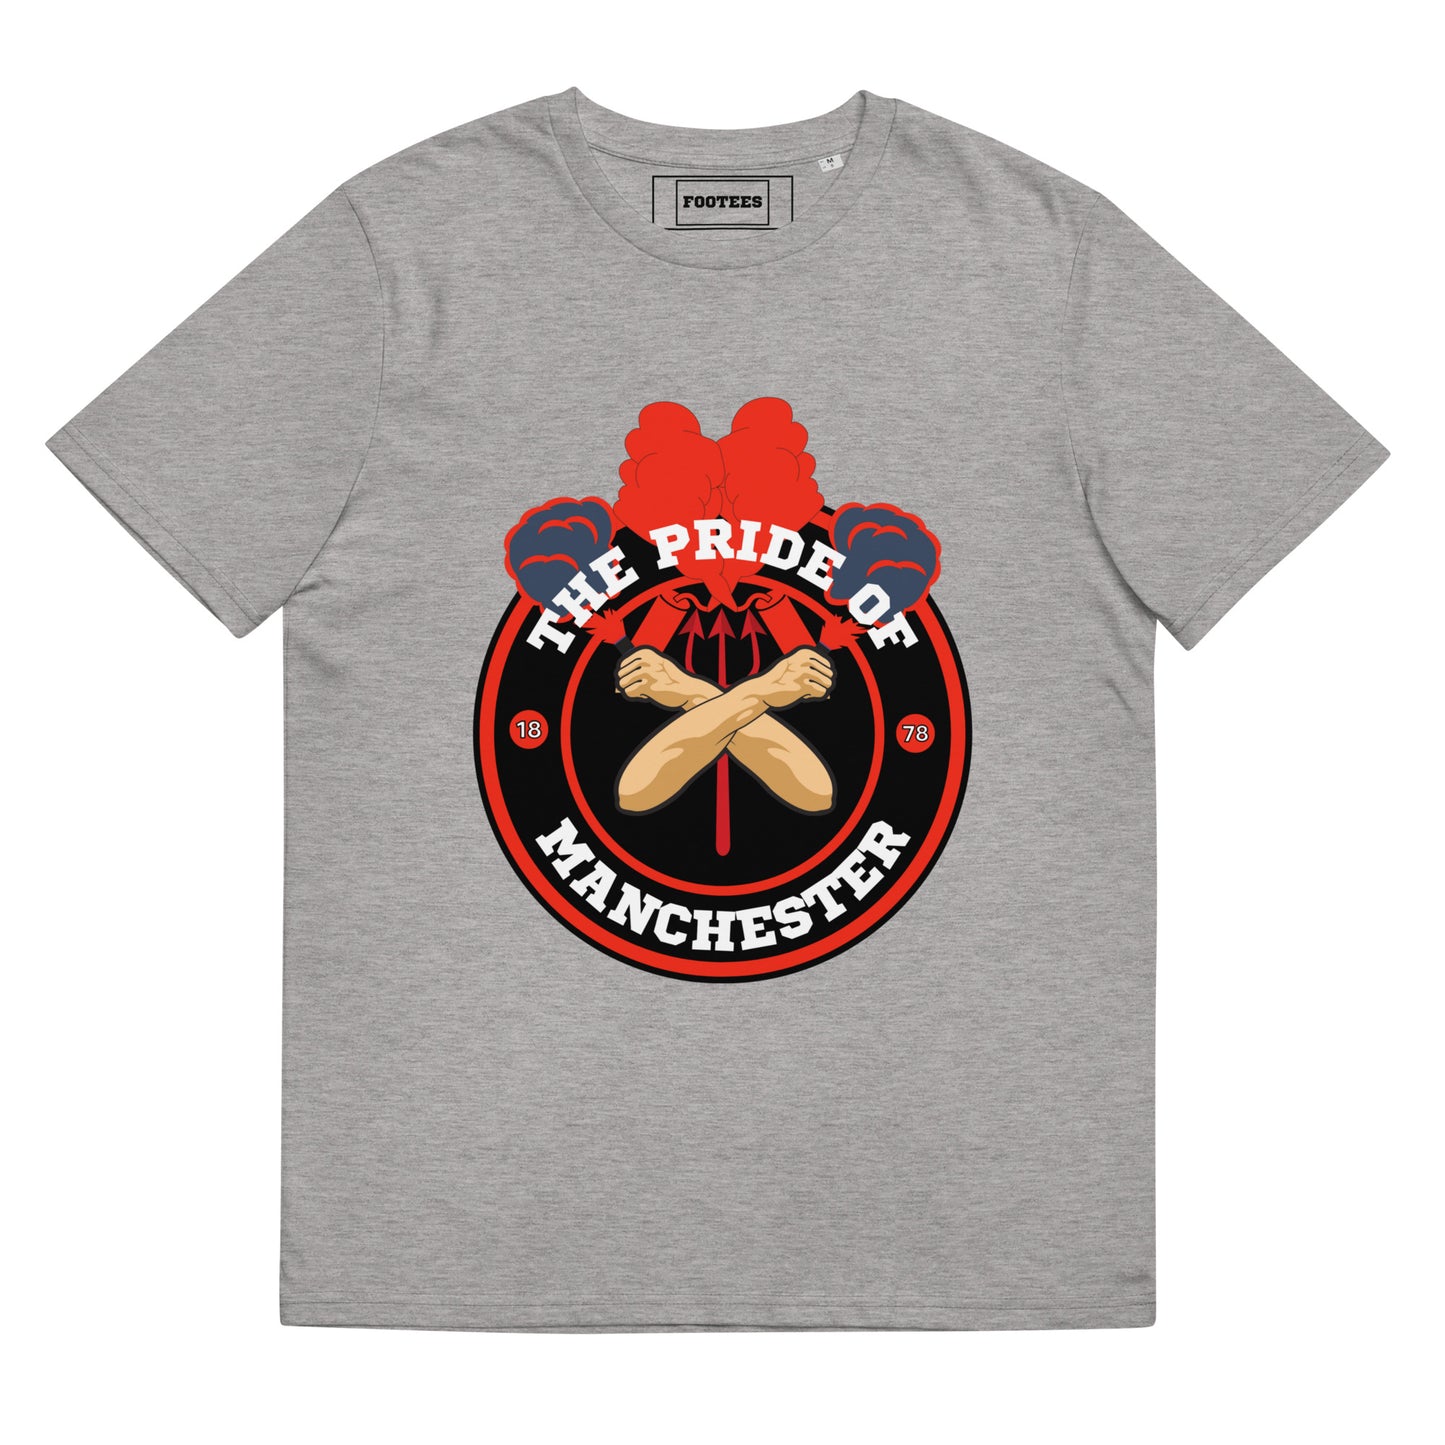 The Pride of Manchester MUFC Tee